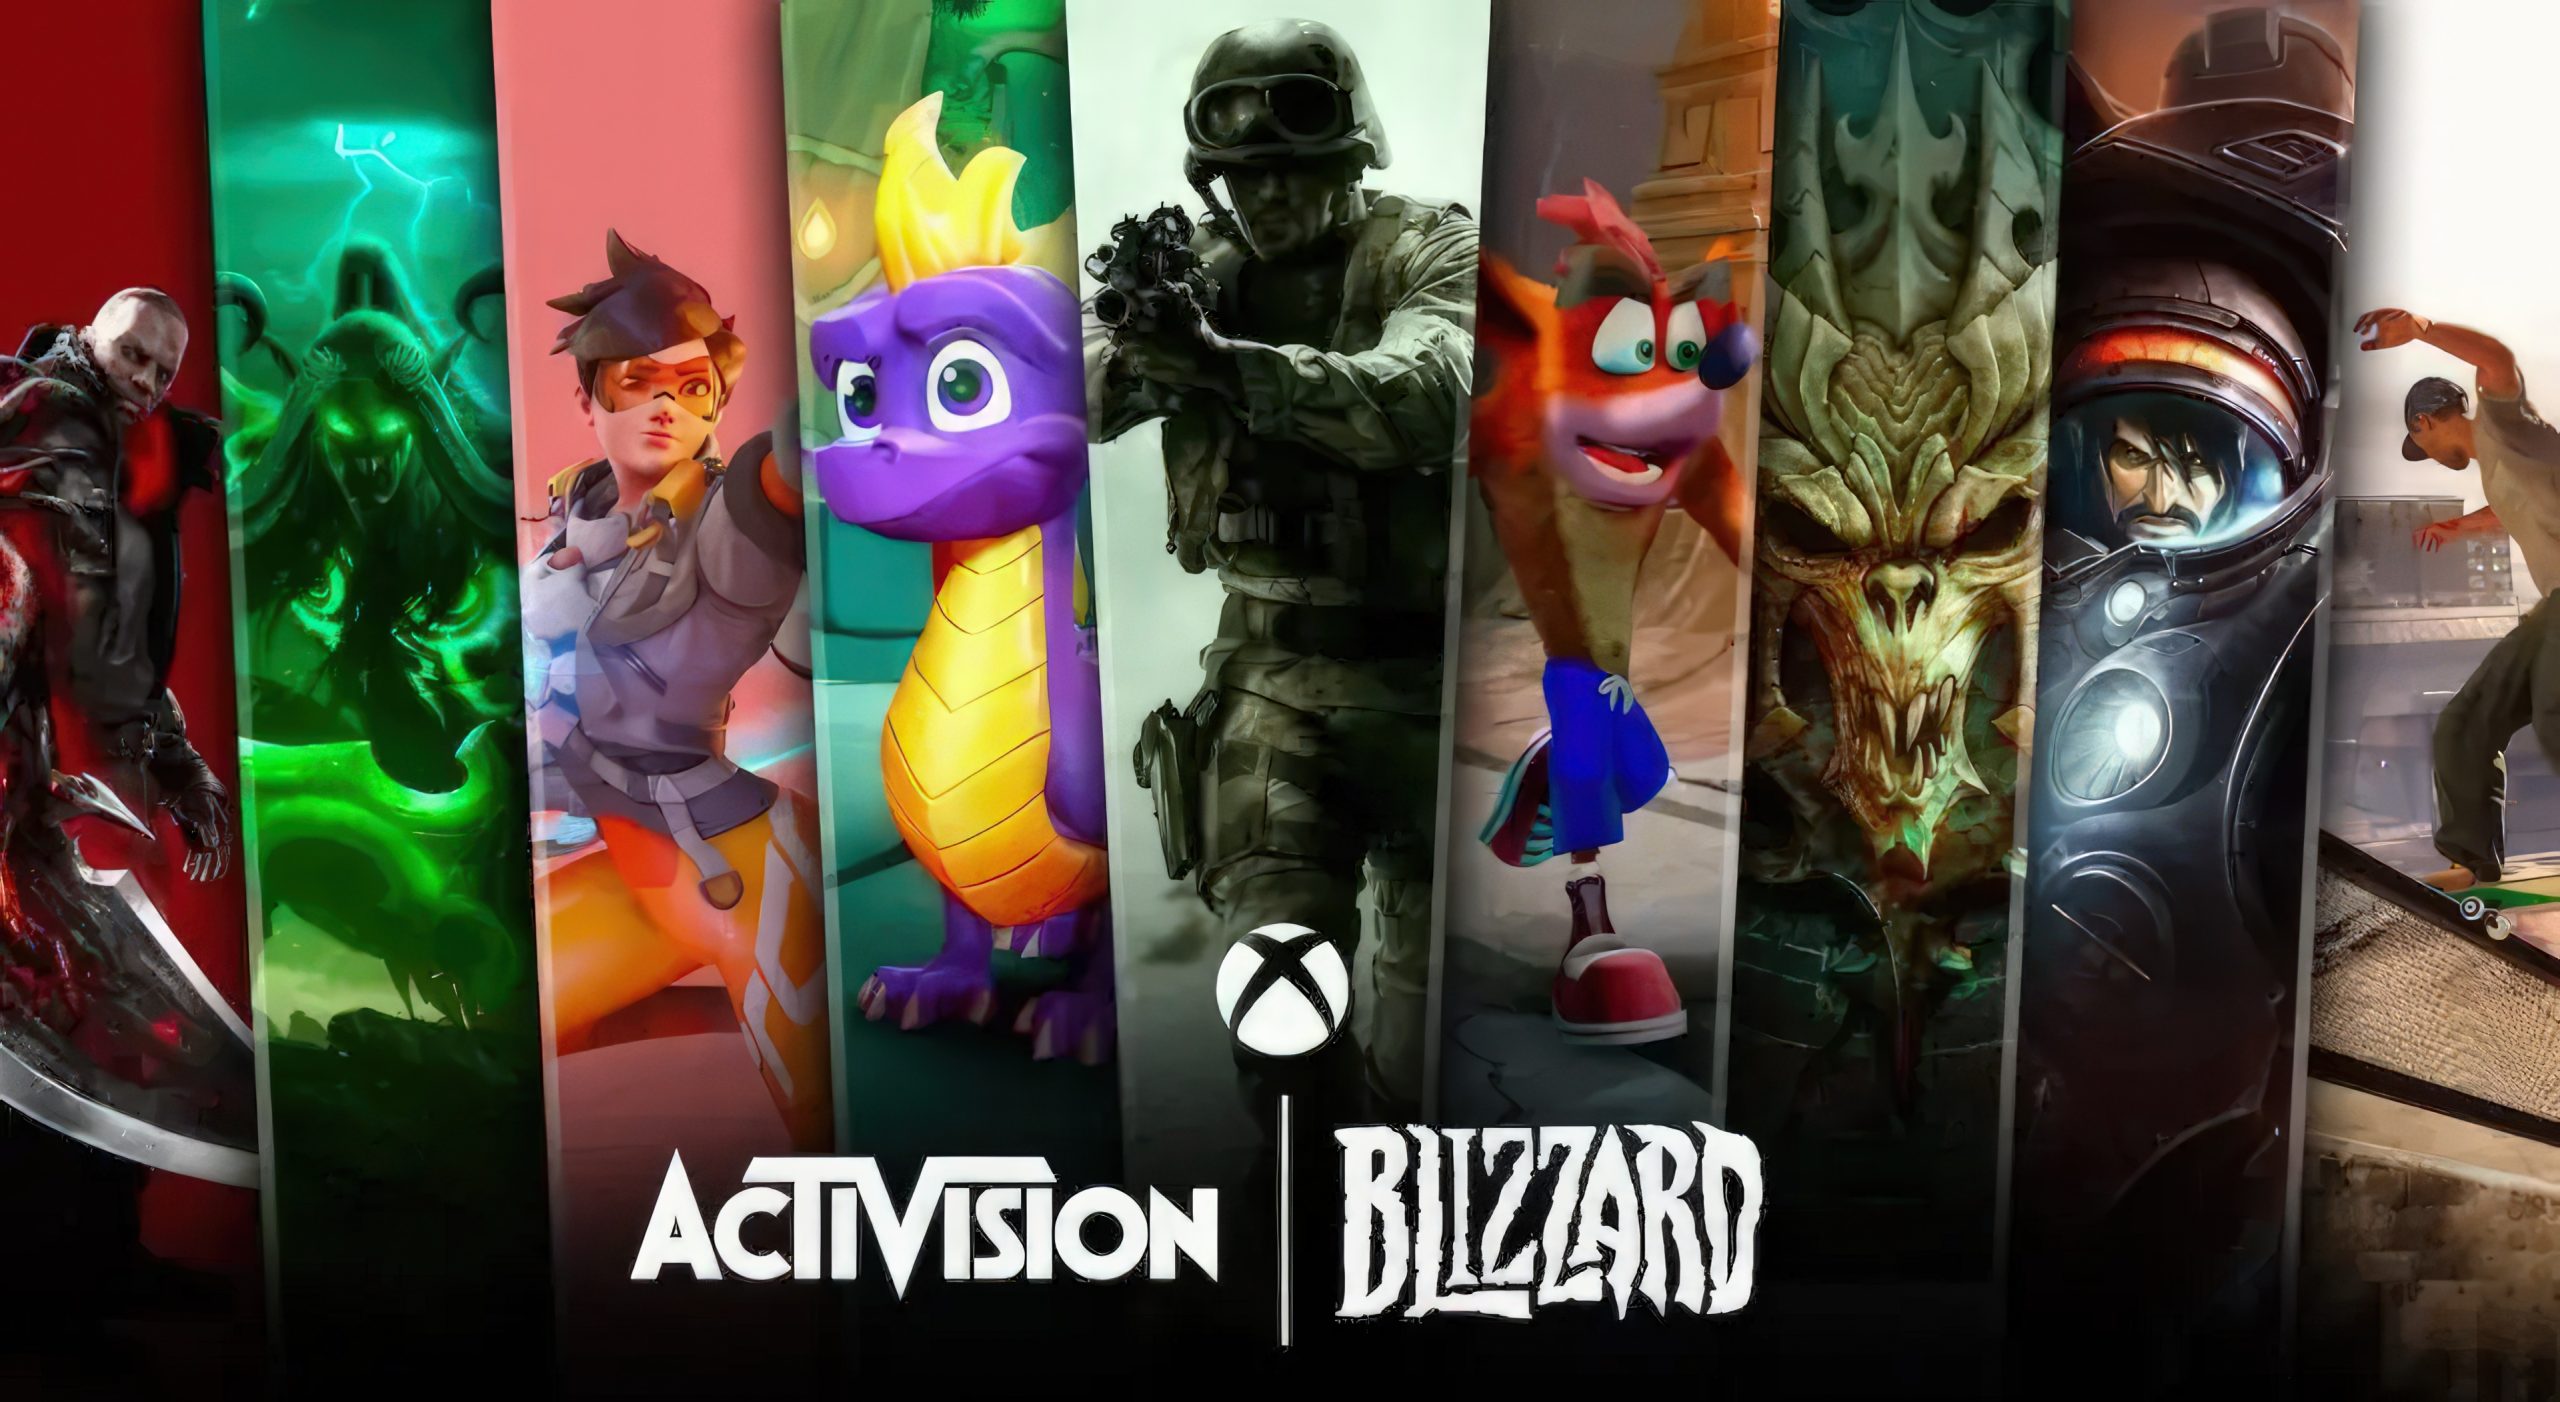 Activision Blizzard Games Headed to Game Pass, Kicking Off with Crash Bandicoot N.Sane Trilogy